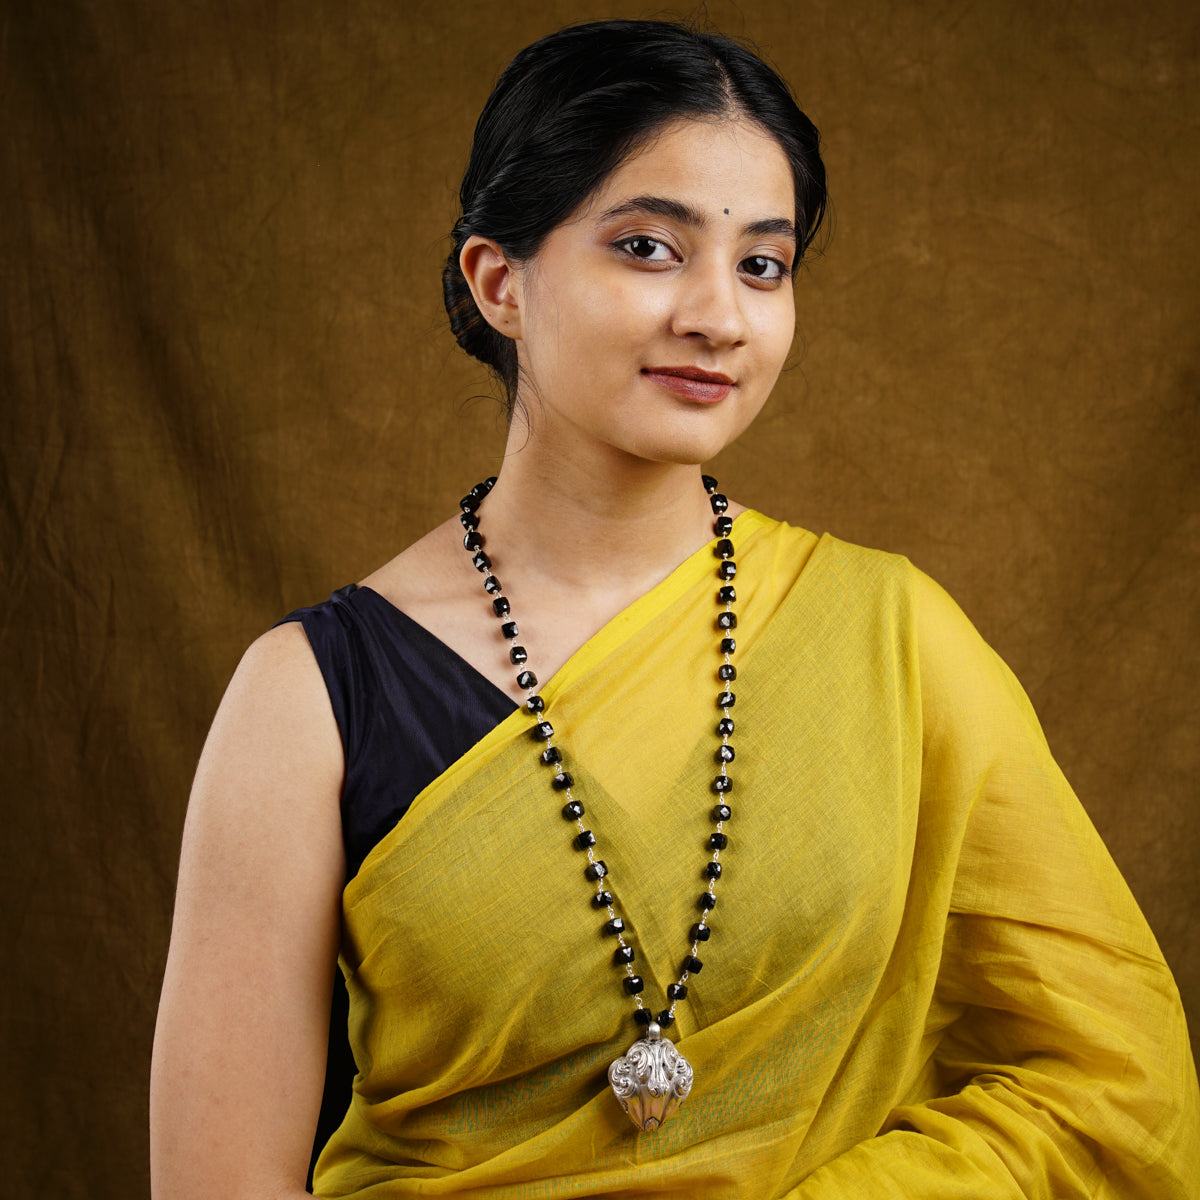 a woman in a yellow sari with a beaded necklace